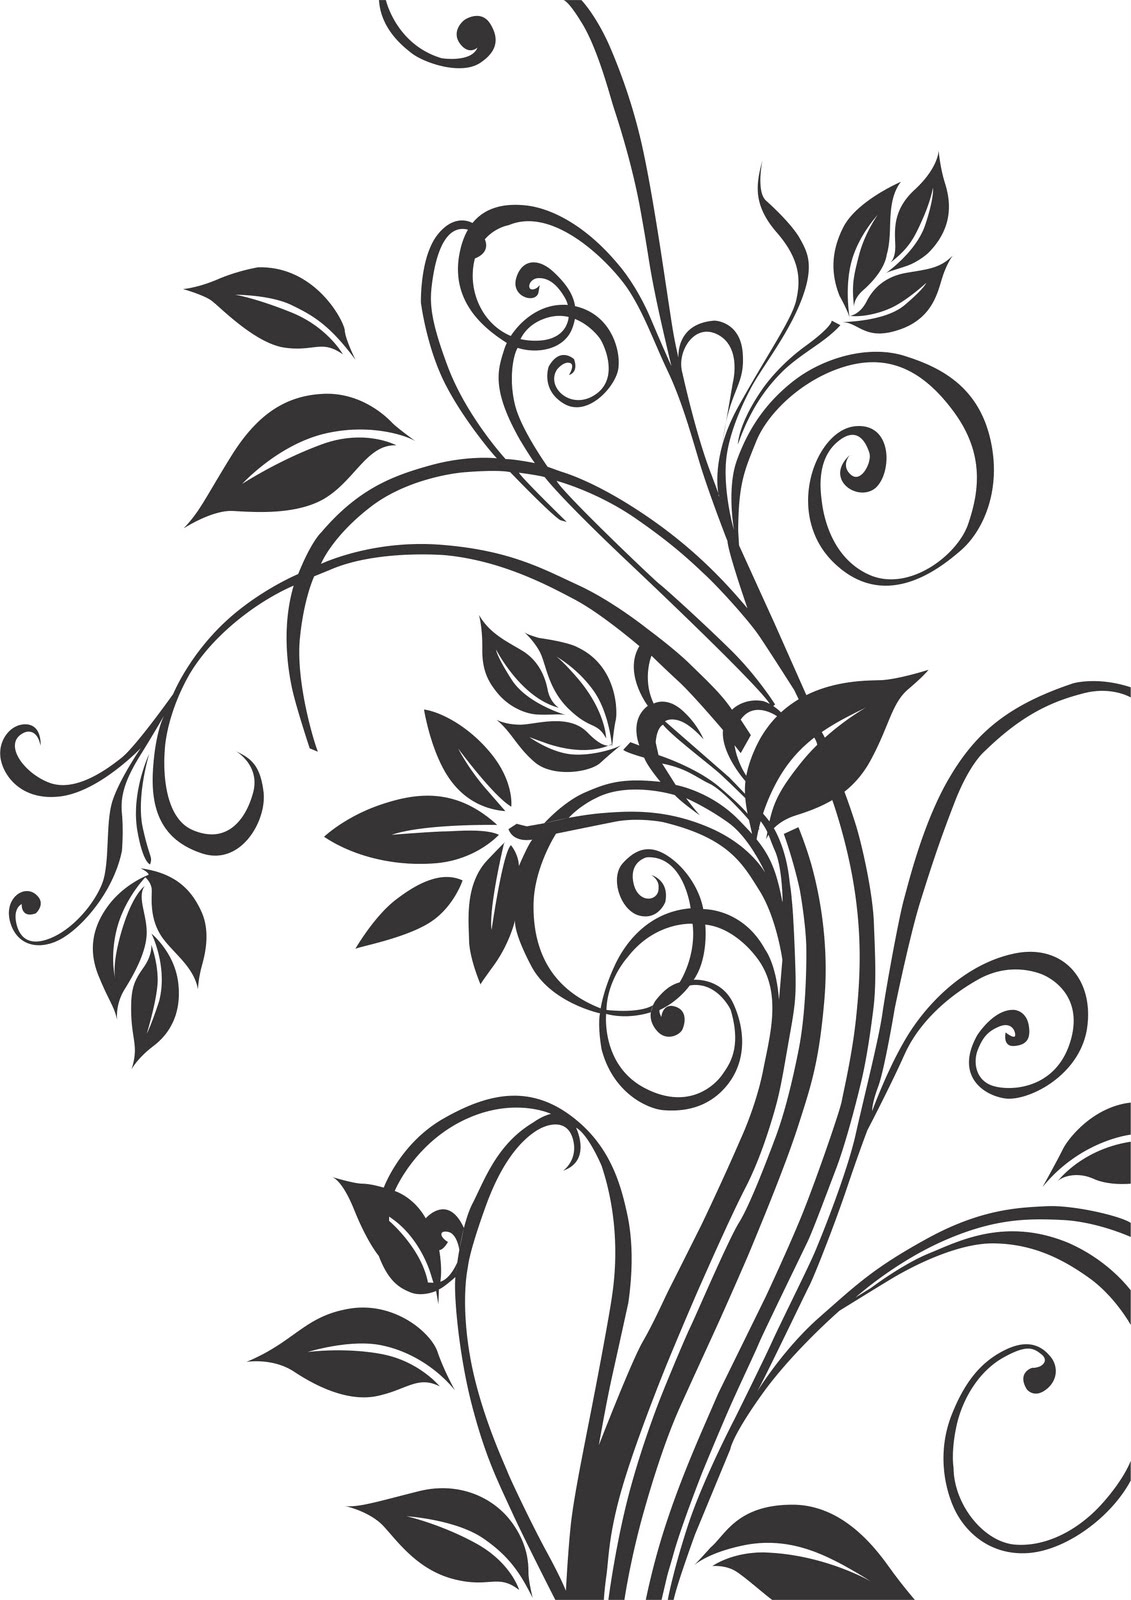 free vector clipart black and white - photo #4